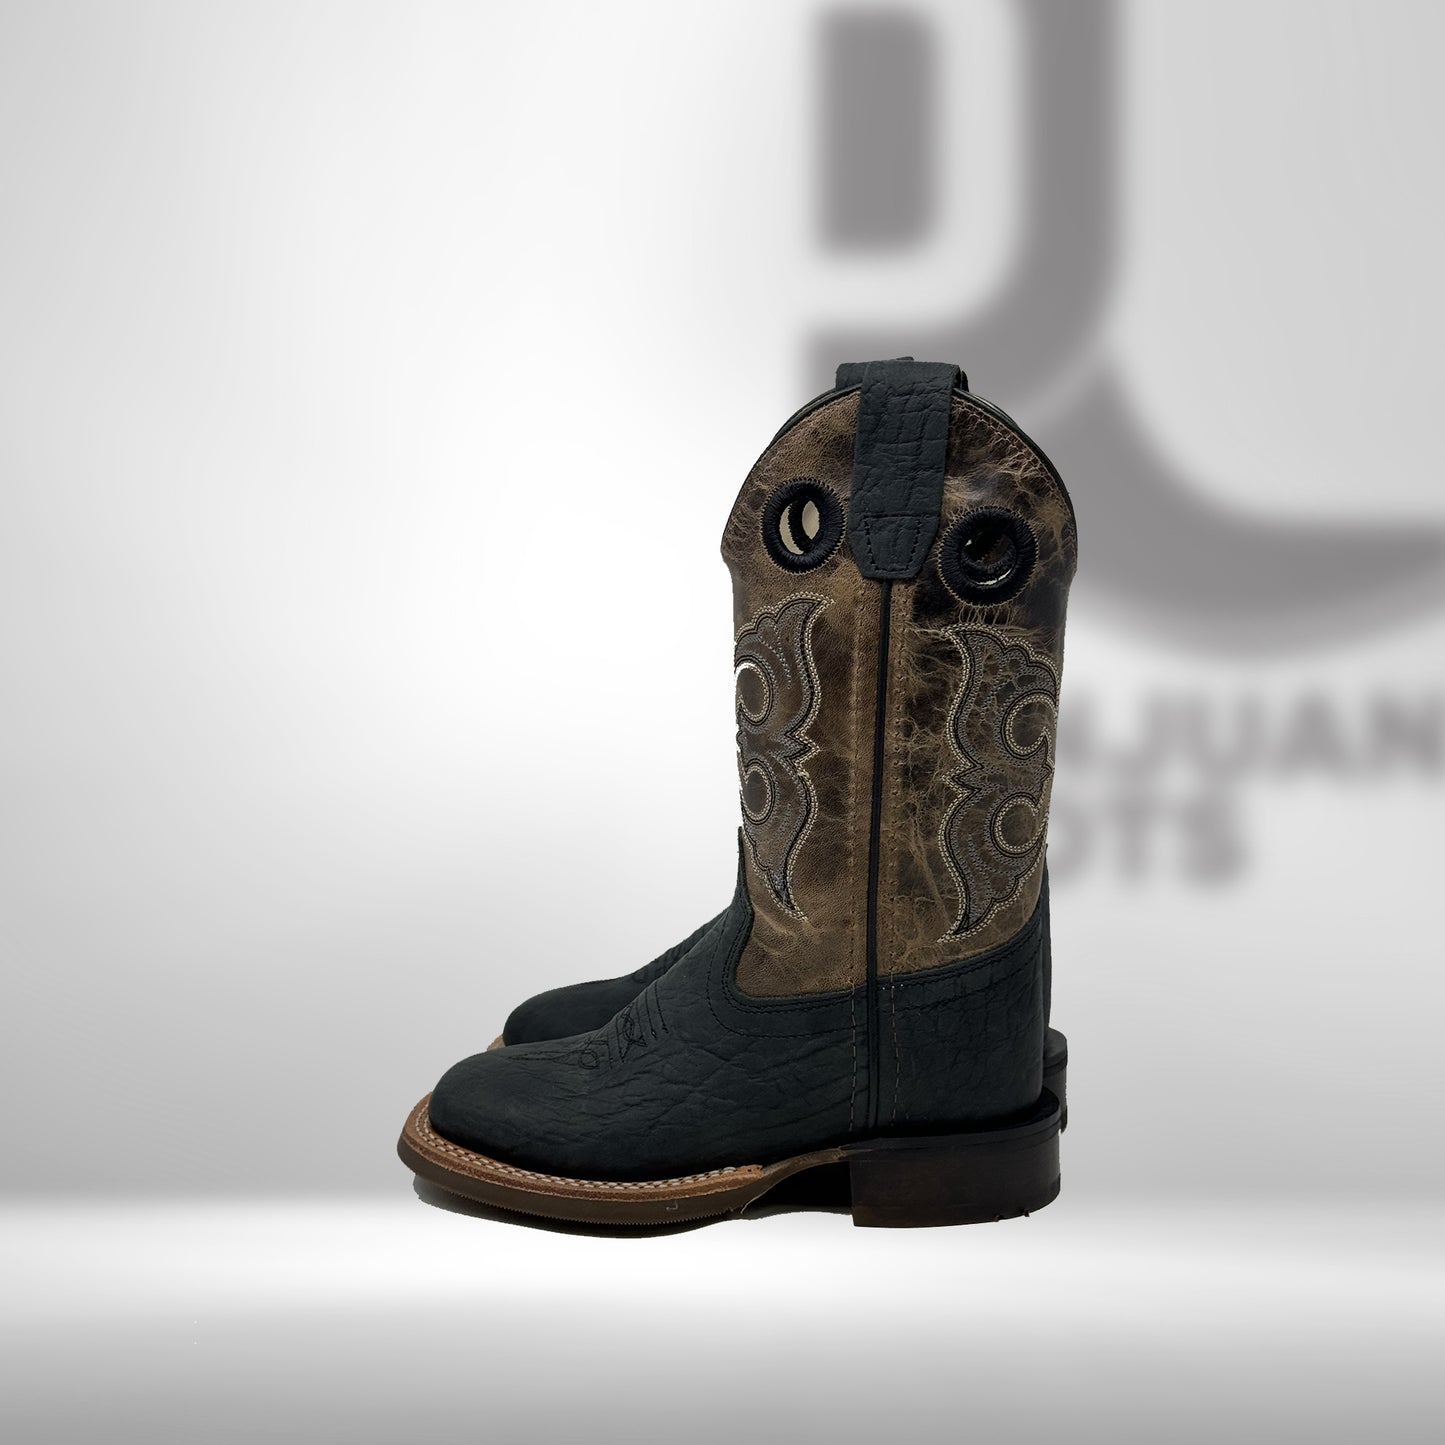 Bsi1966 | Old West Child's Boots